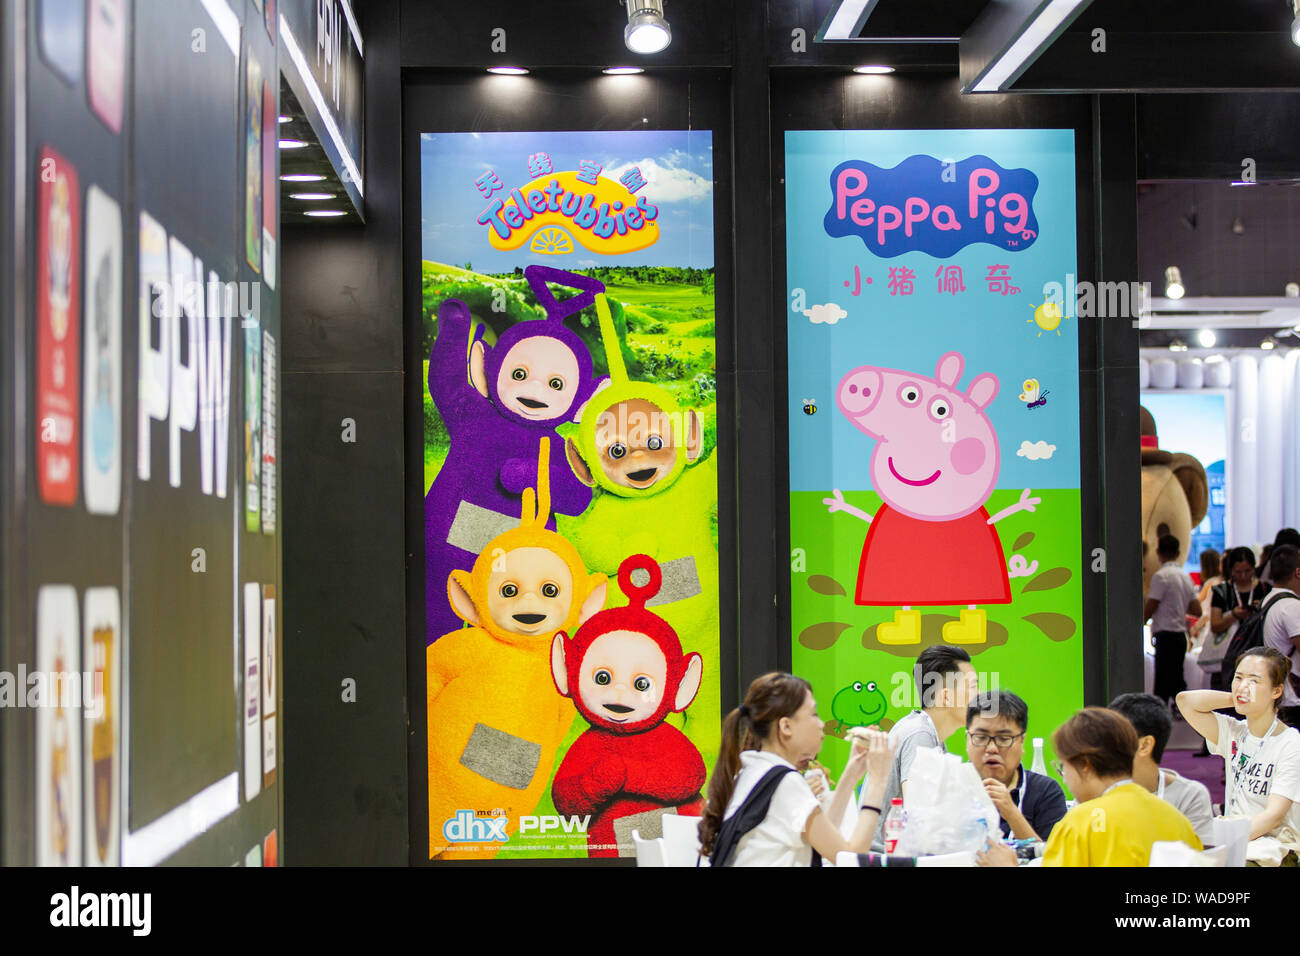 Teletubbies and Peppa from English cartoon show up in China Licensing Expo 2019 at National Exhibition and Convention Center in Shanghai, China, 24 Ju Stock Photo